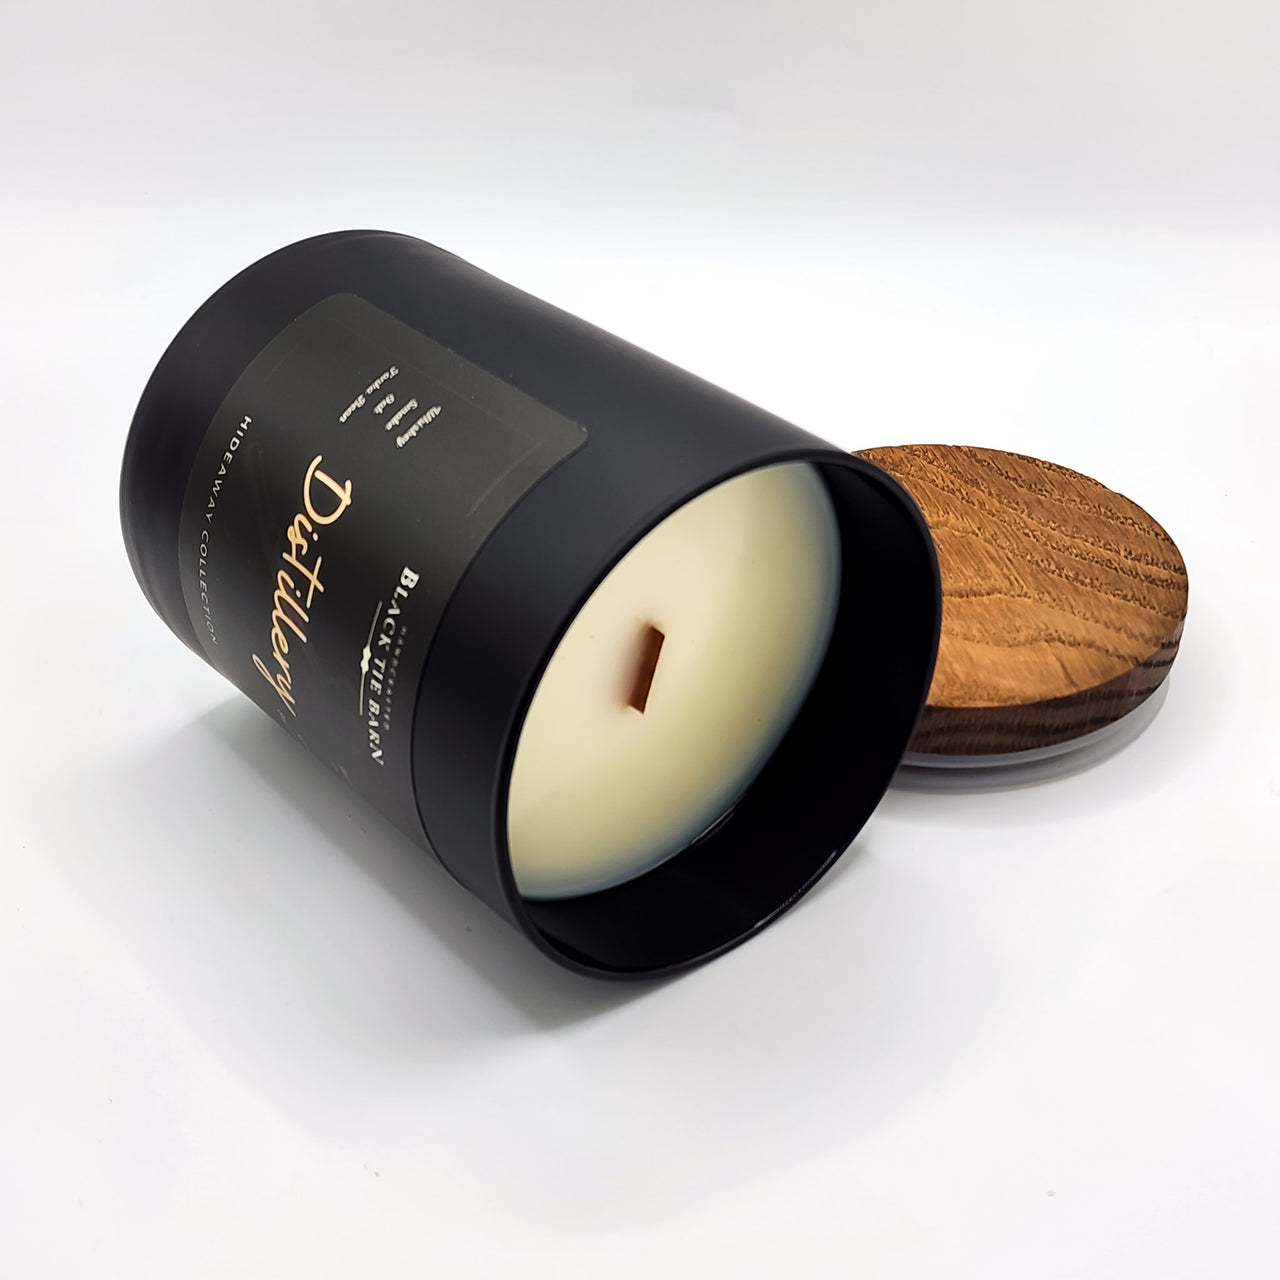 Distillery | Hideaway Collection Wood-Wick Candle (10oz)